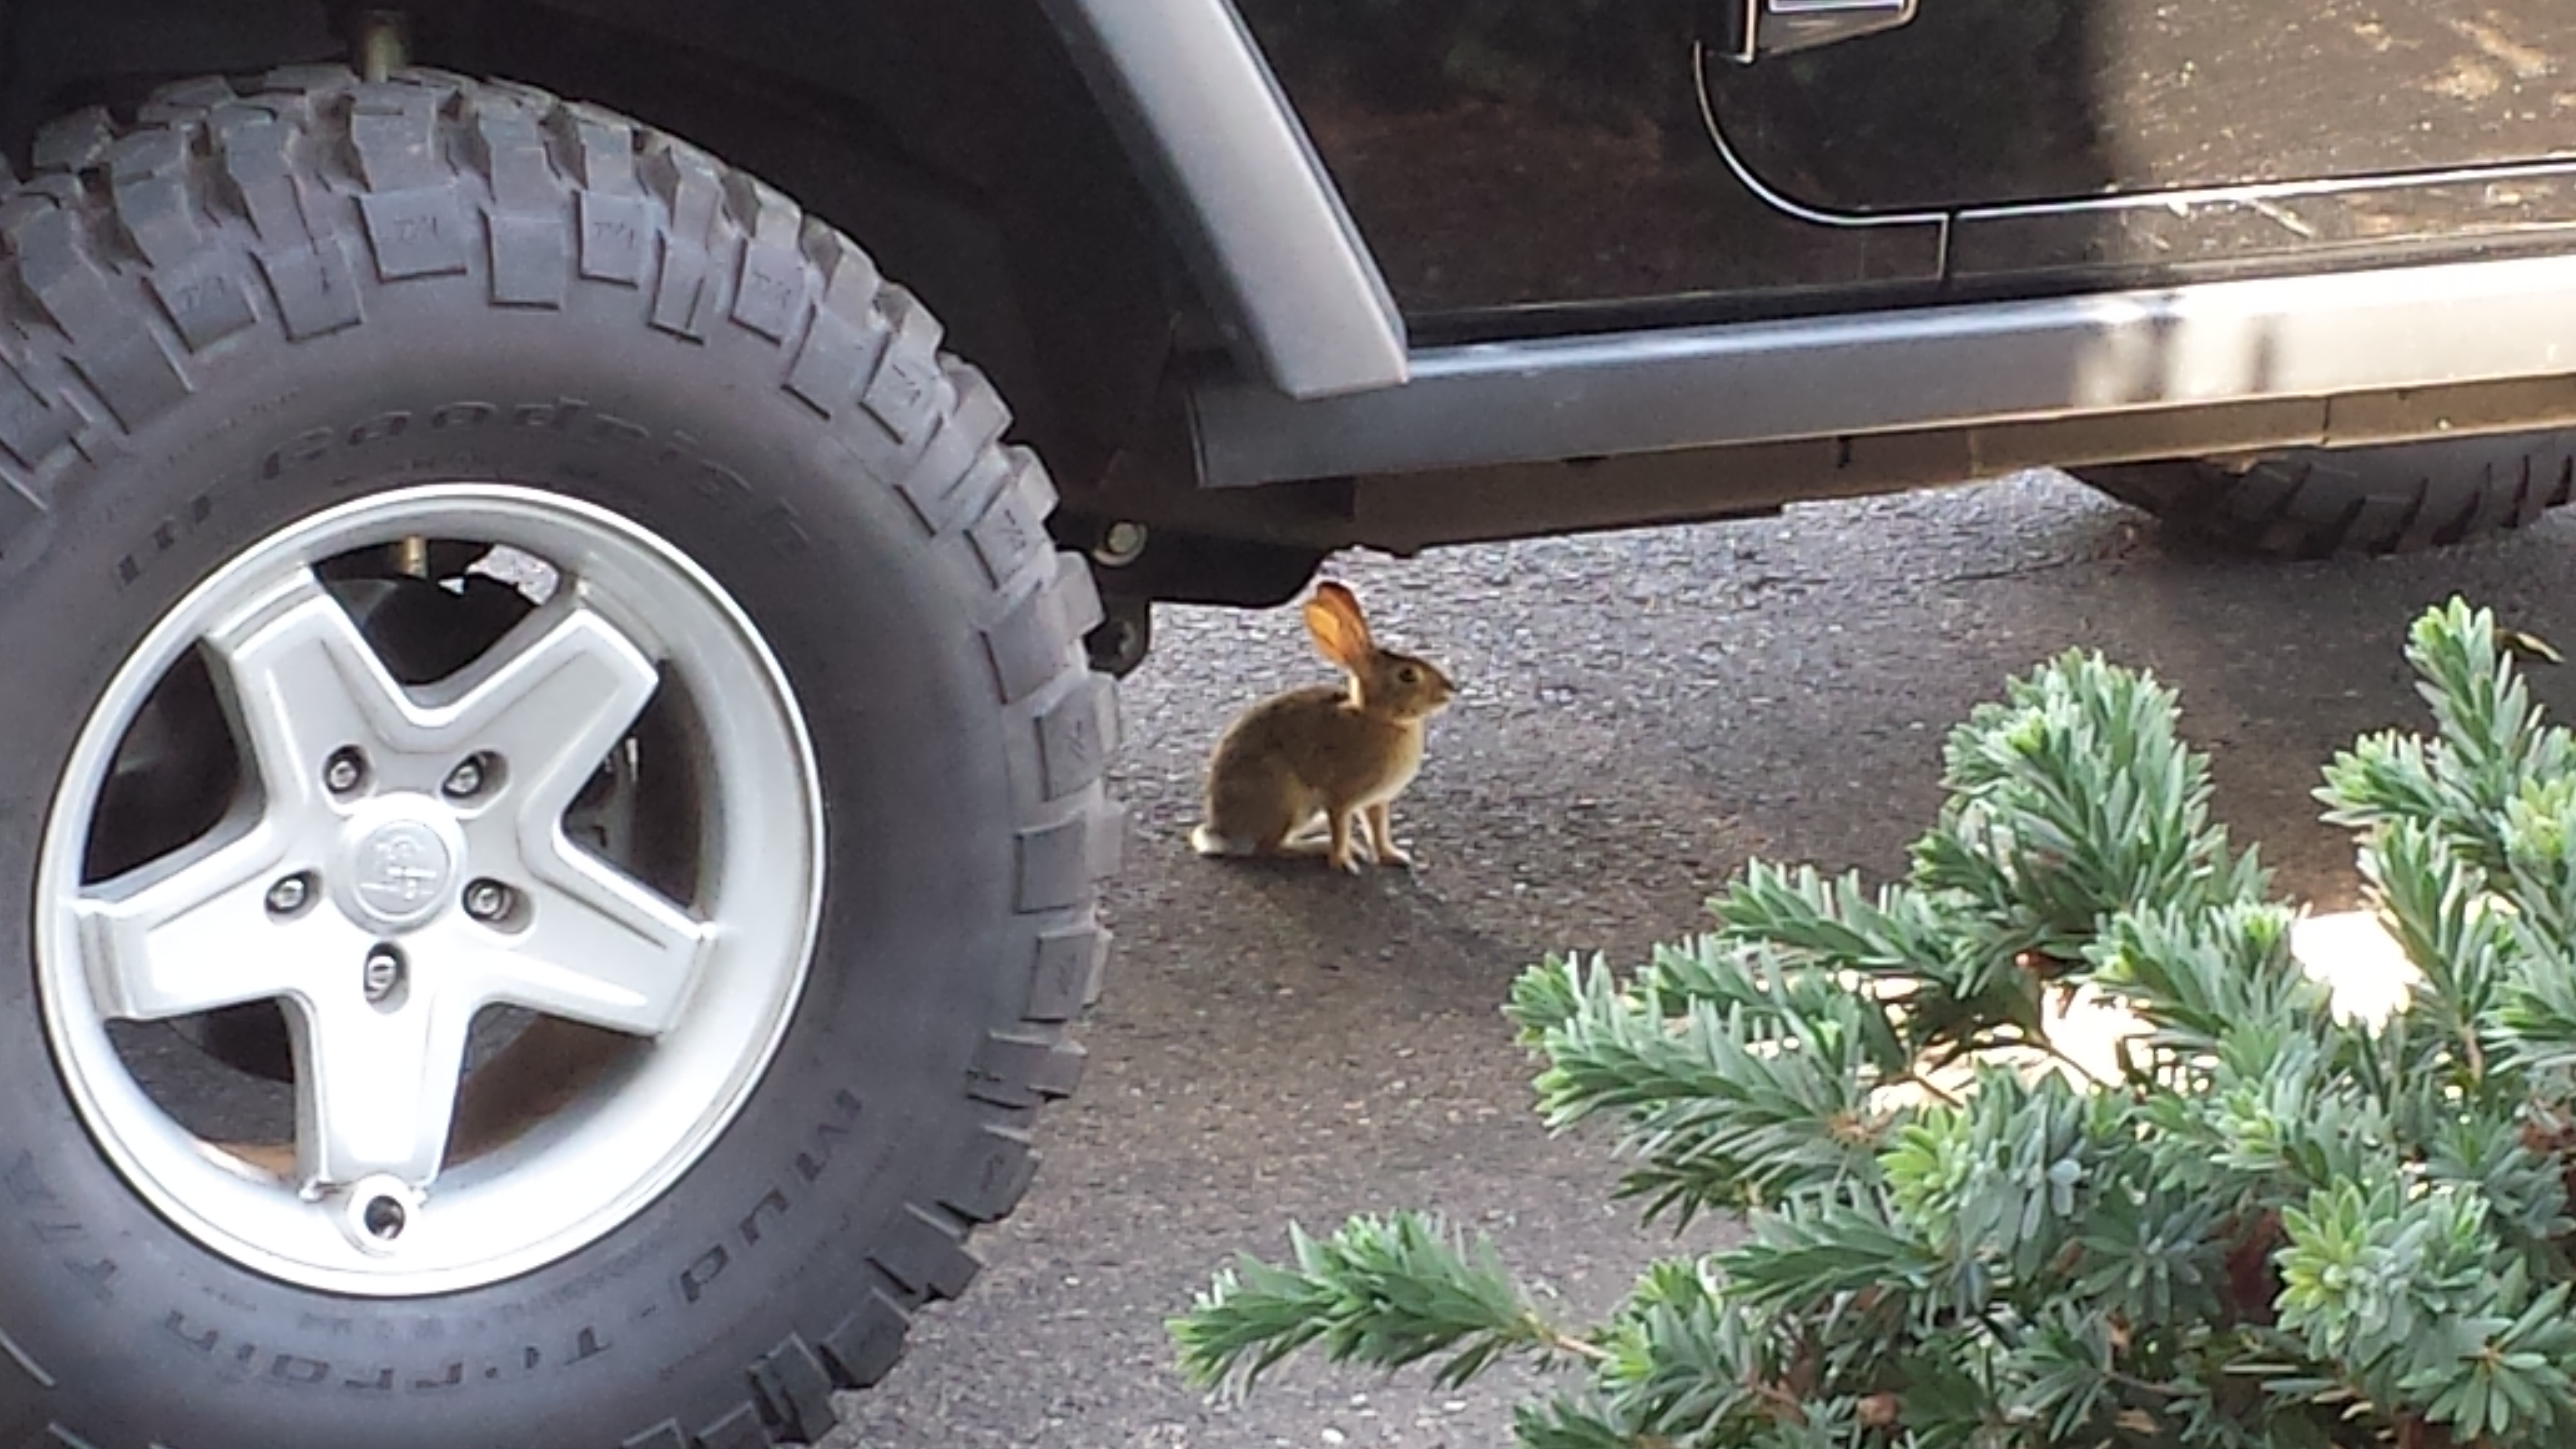 A new acquaintance takes a respite in the shade and safety of my Jeep.